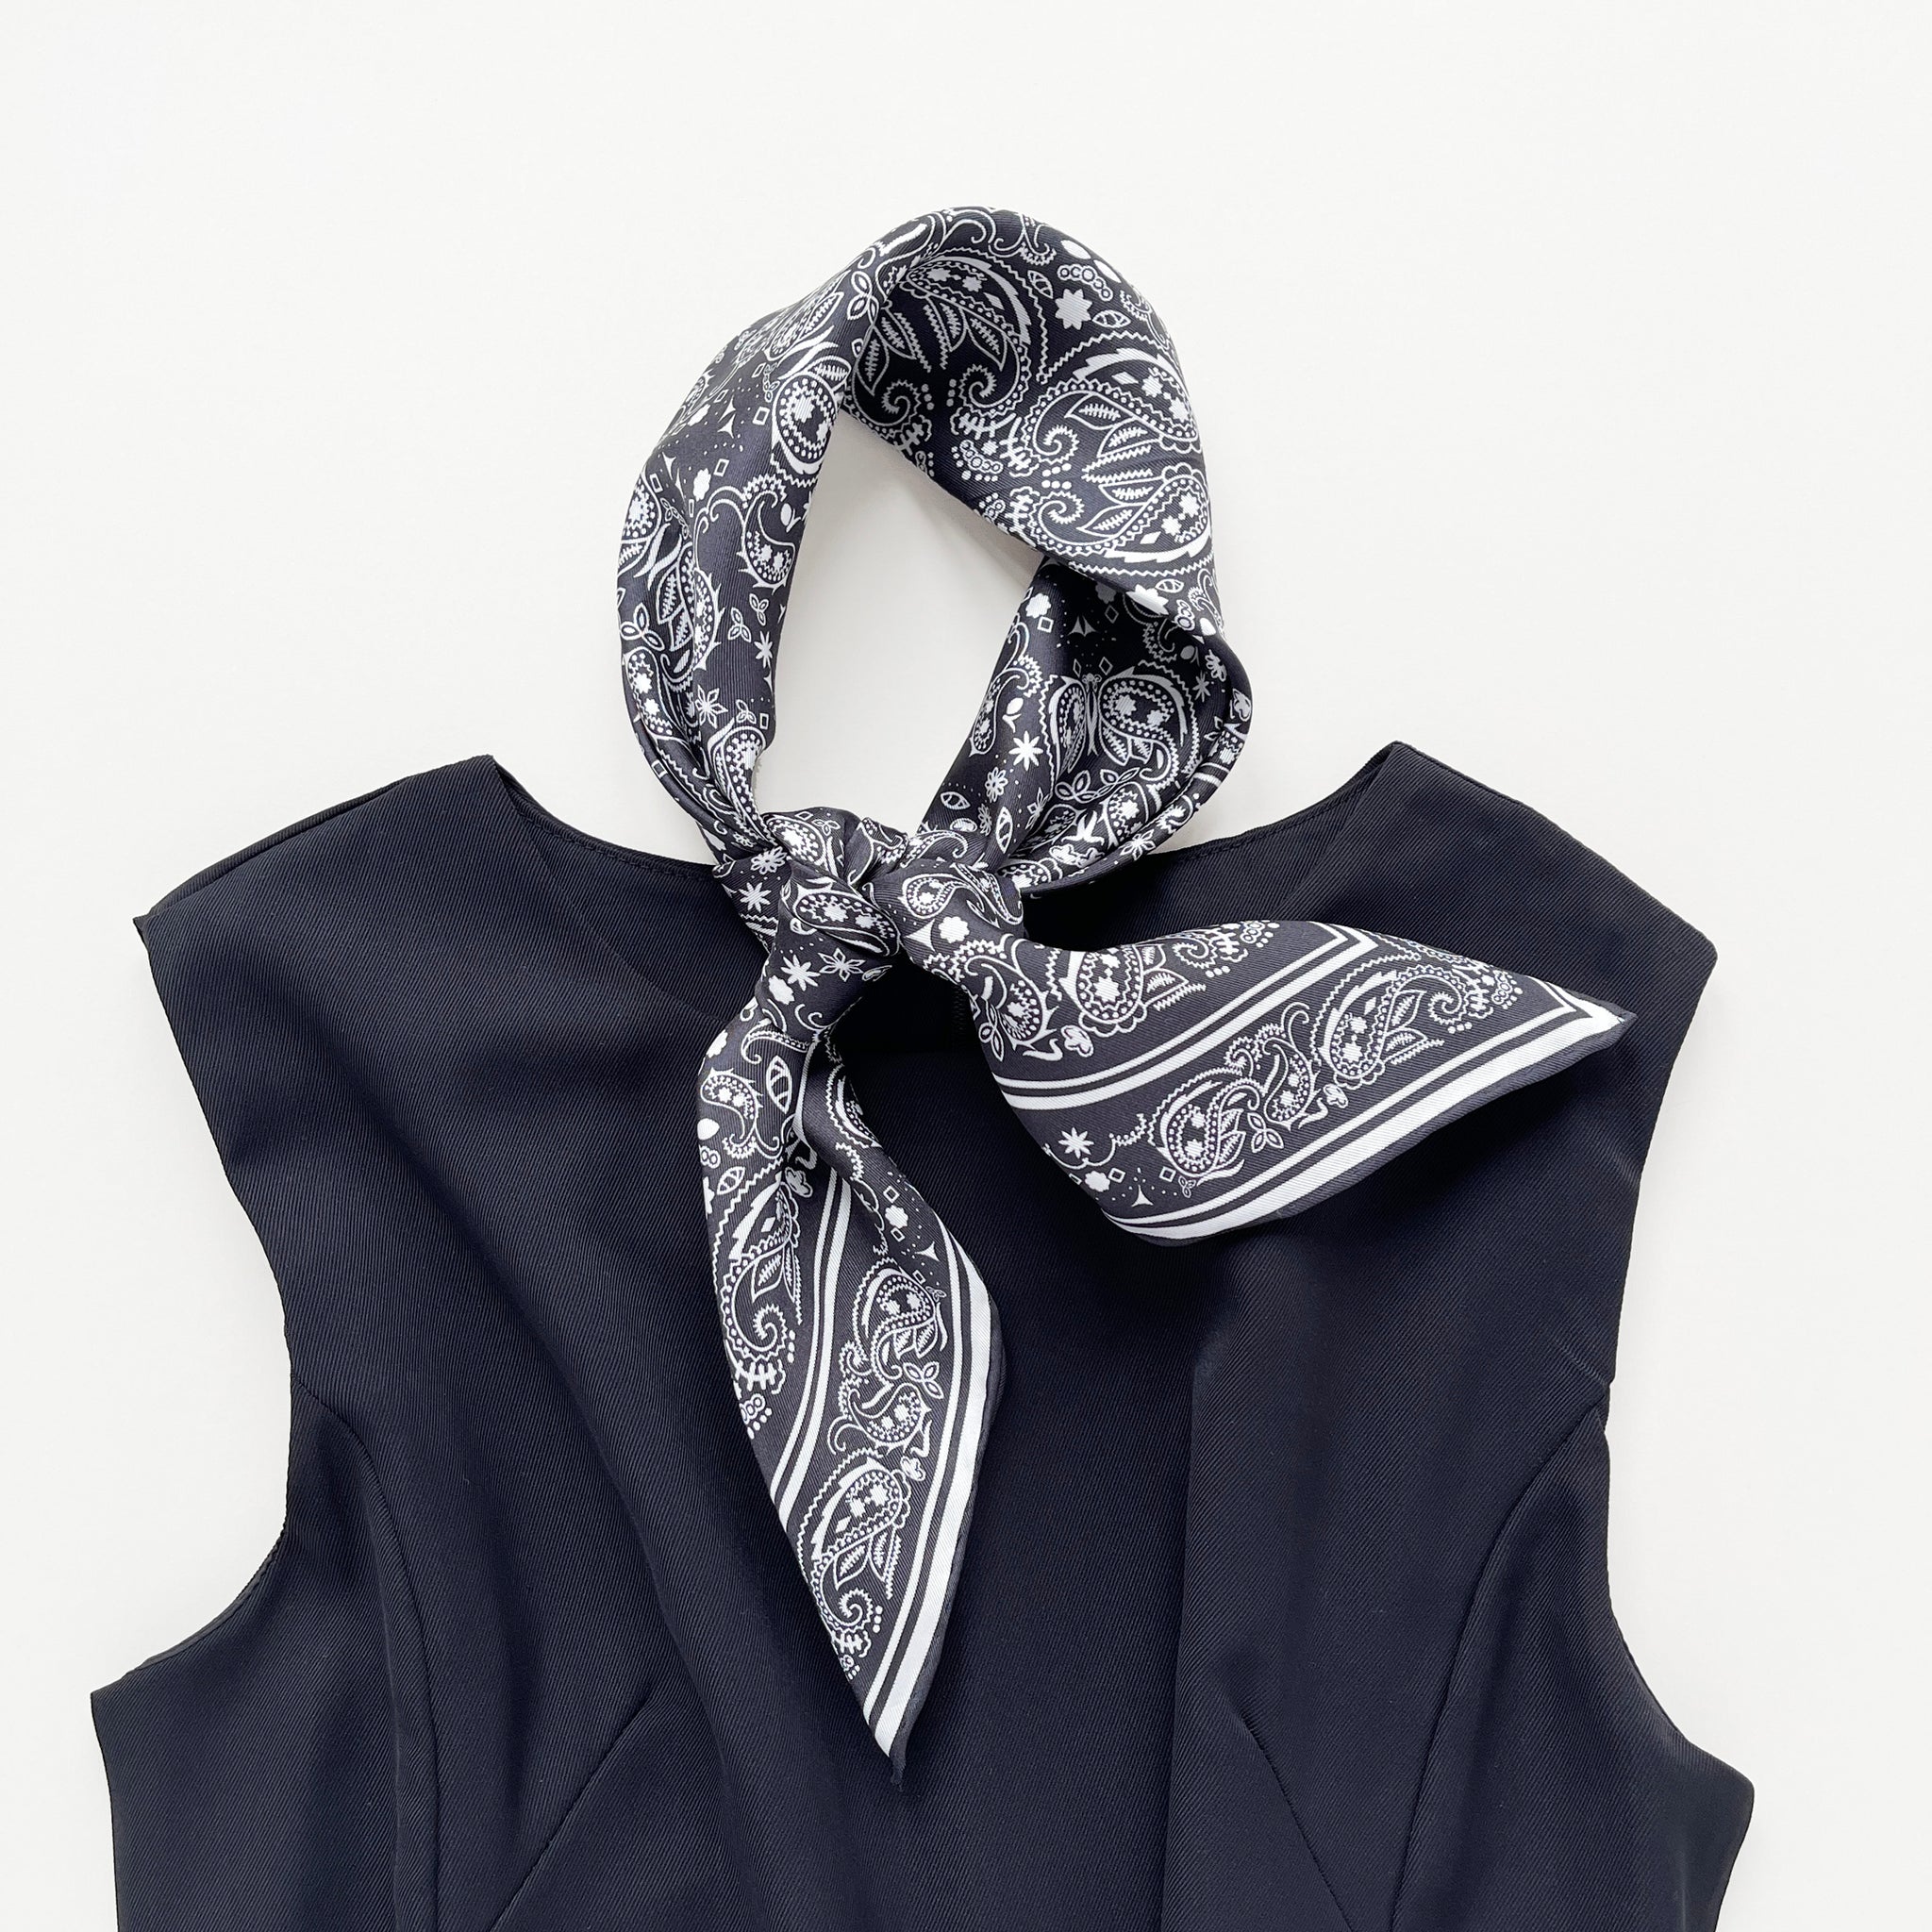 a black and white silk scarf neckerchief featuring bohemian paisley print with hand-rolled edges, knotted as a classic neckerchief, paired with a black dress